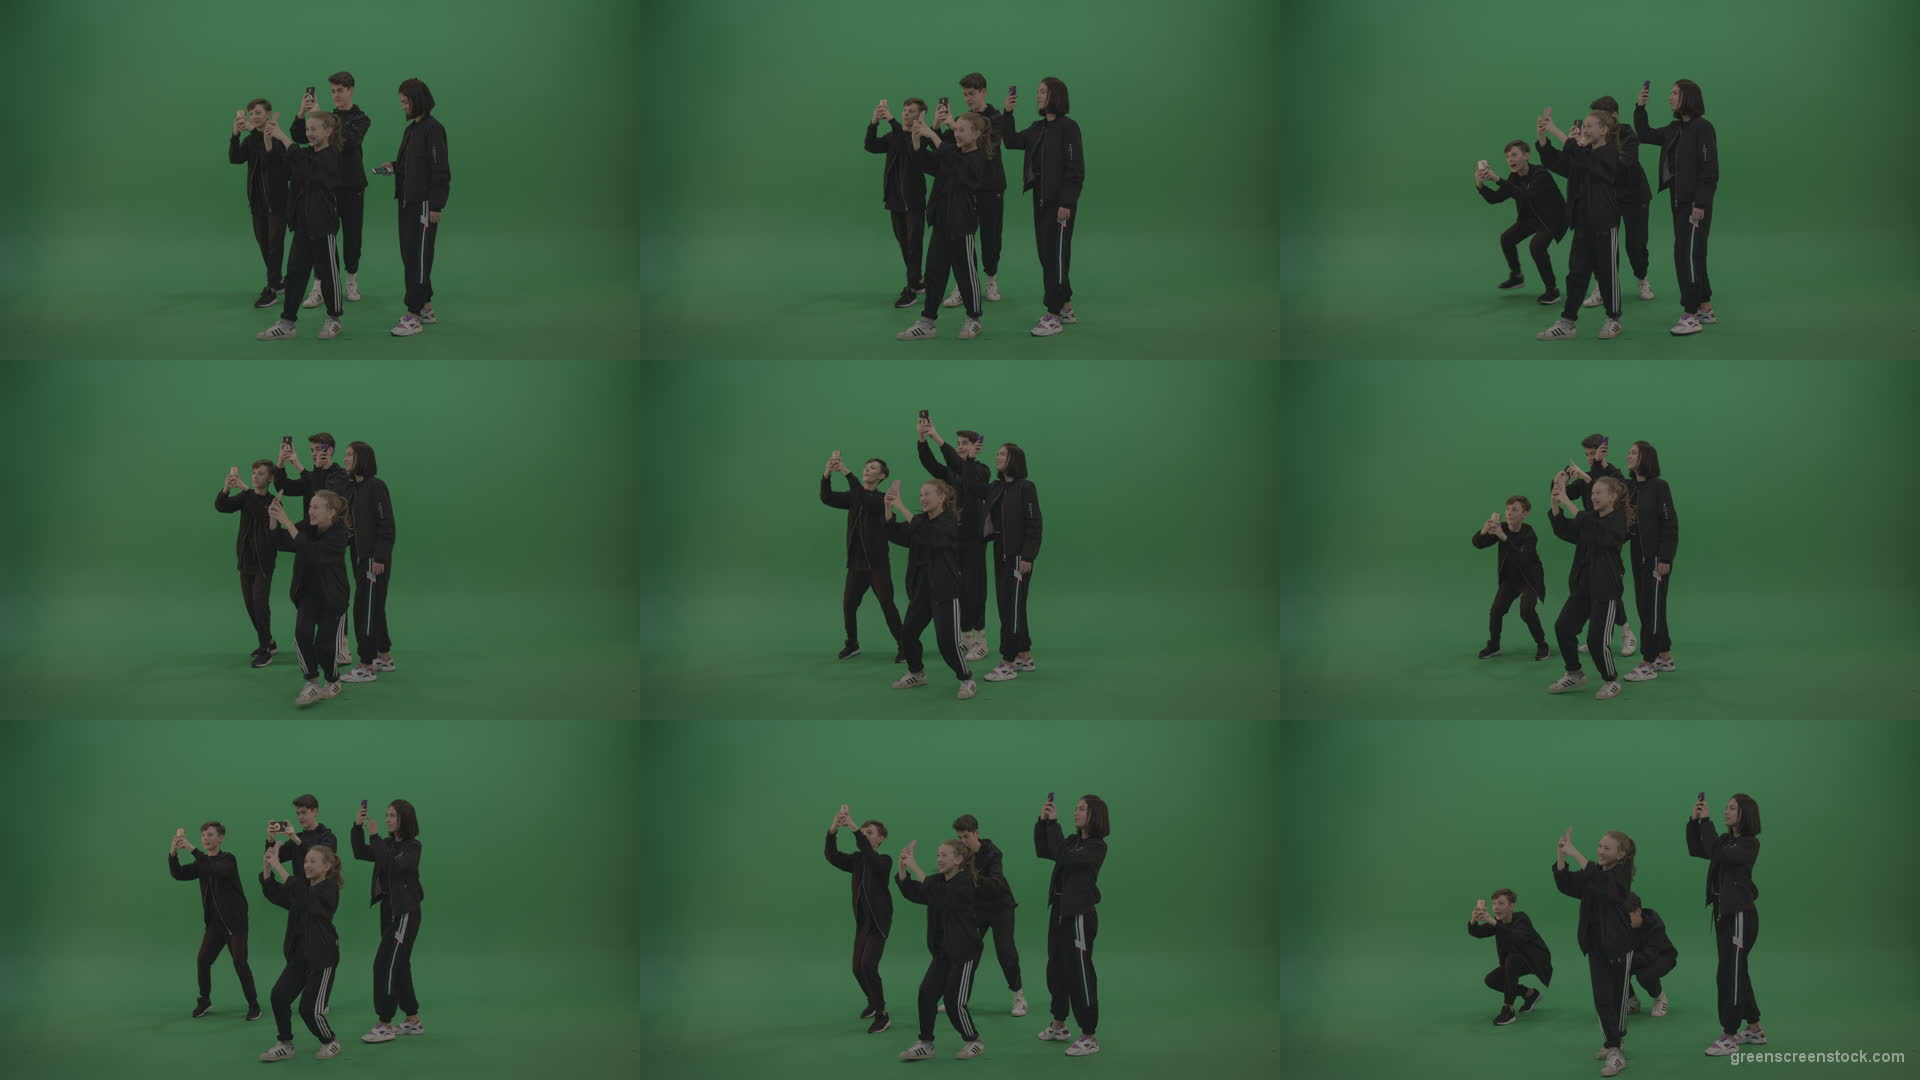 Four-kids-in-black-wears-take-pictures-over-chromakey-background Green Screen Stock